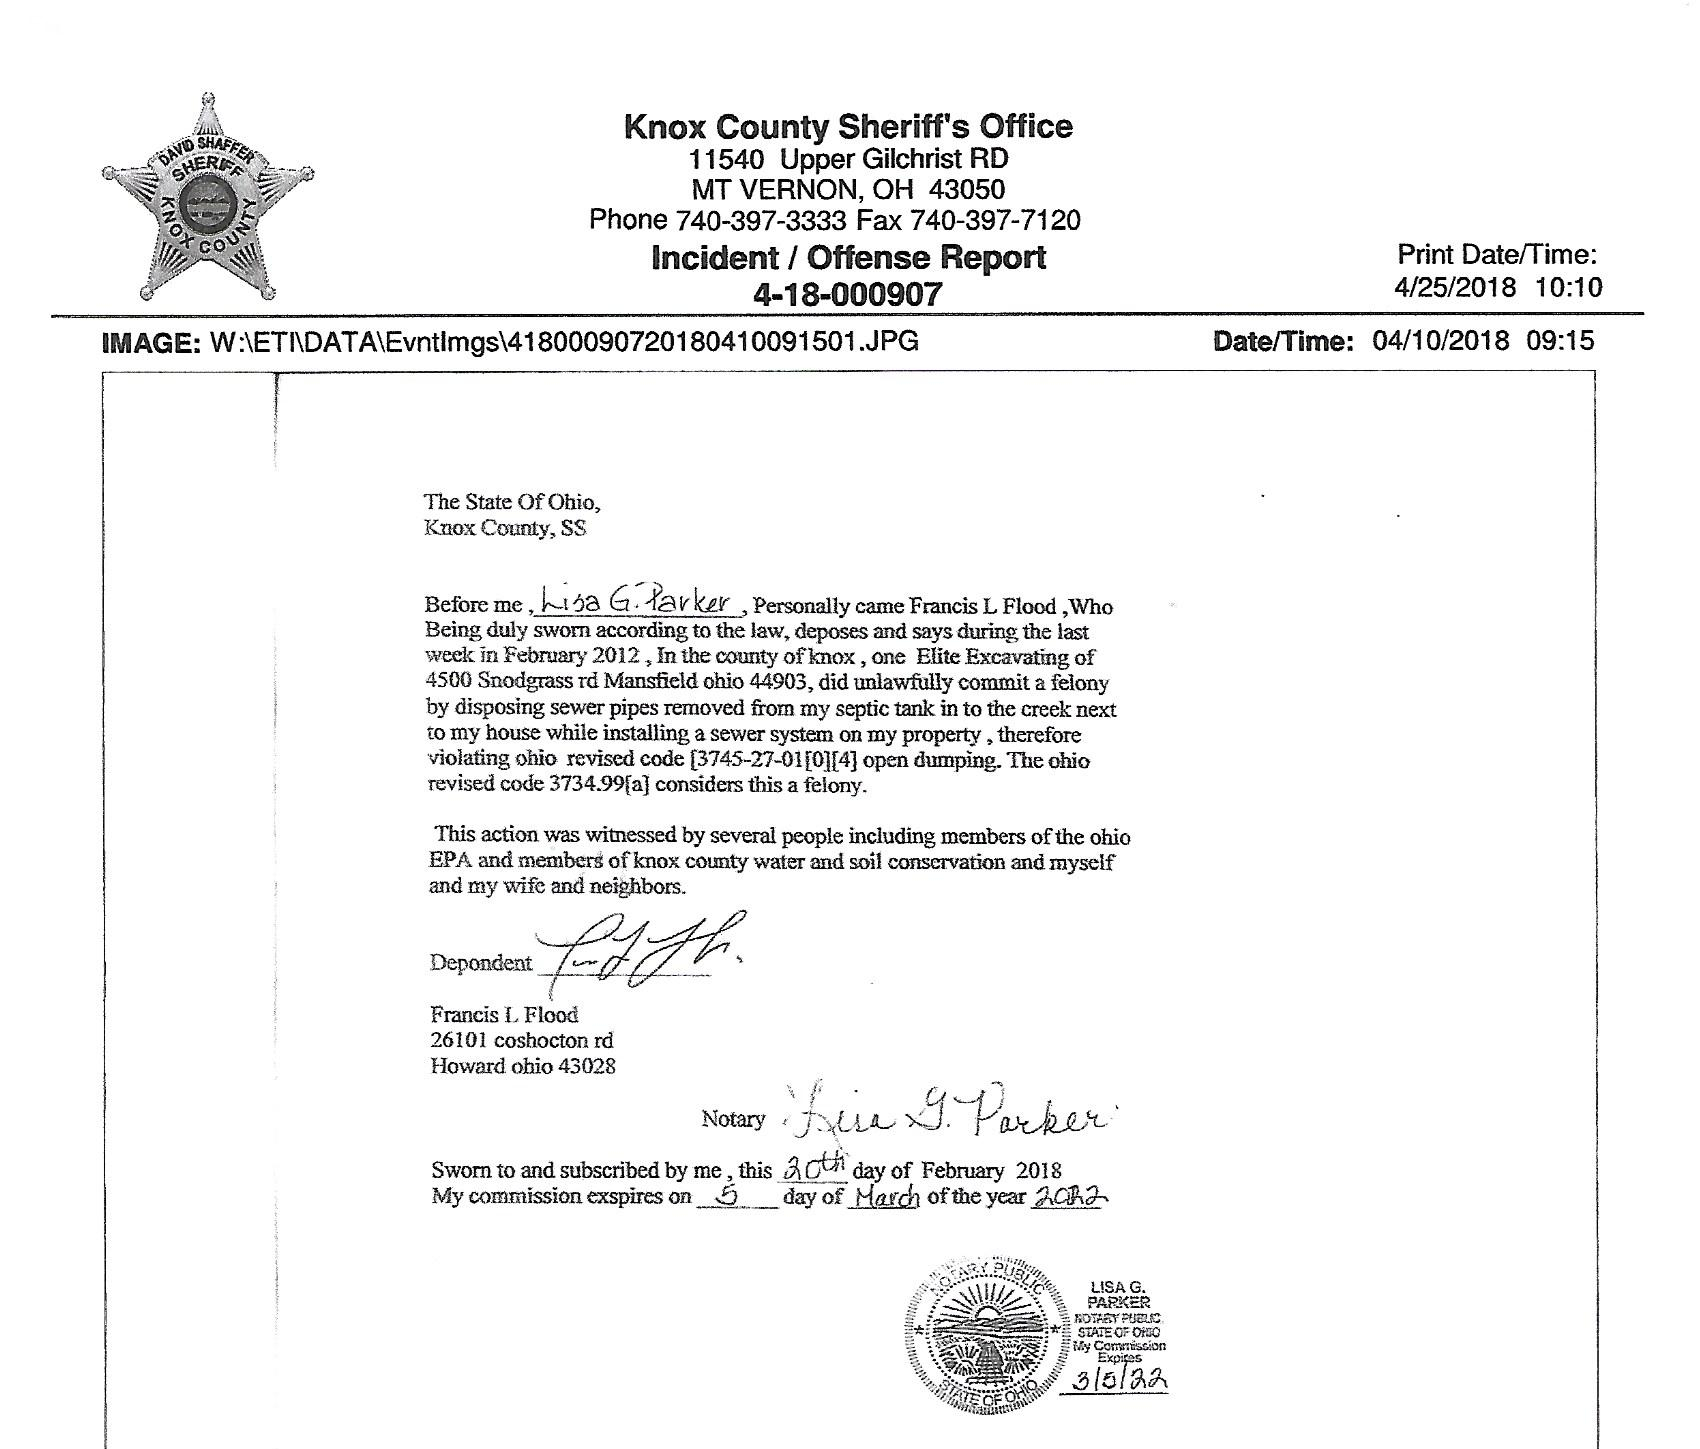 Knox County Sheriff's Report (2)